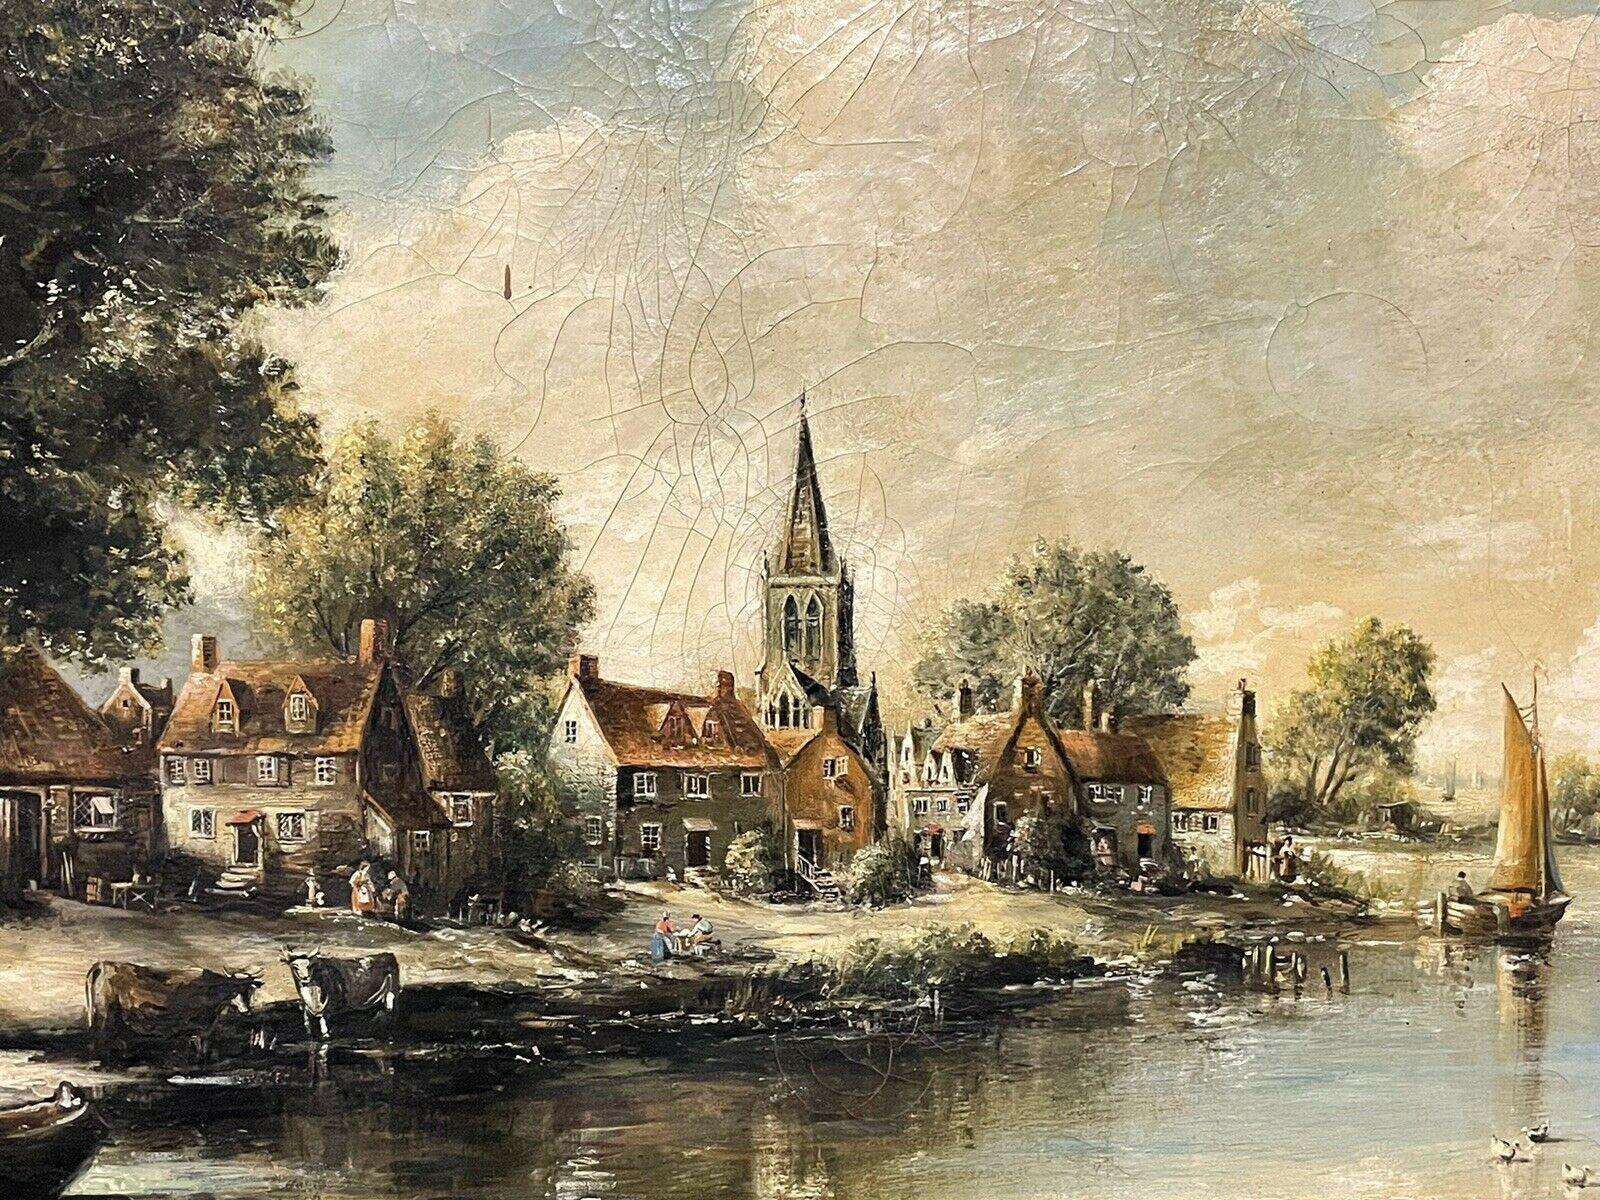 HUGE ANTIQUE BRITISH OIL PAINTING RIVER LANDSCAPE & BUILDINGS - SIGNED RIMA - Victorian Painting by Norman French